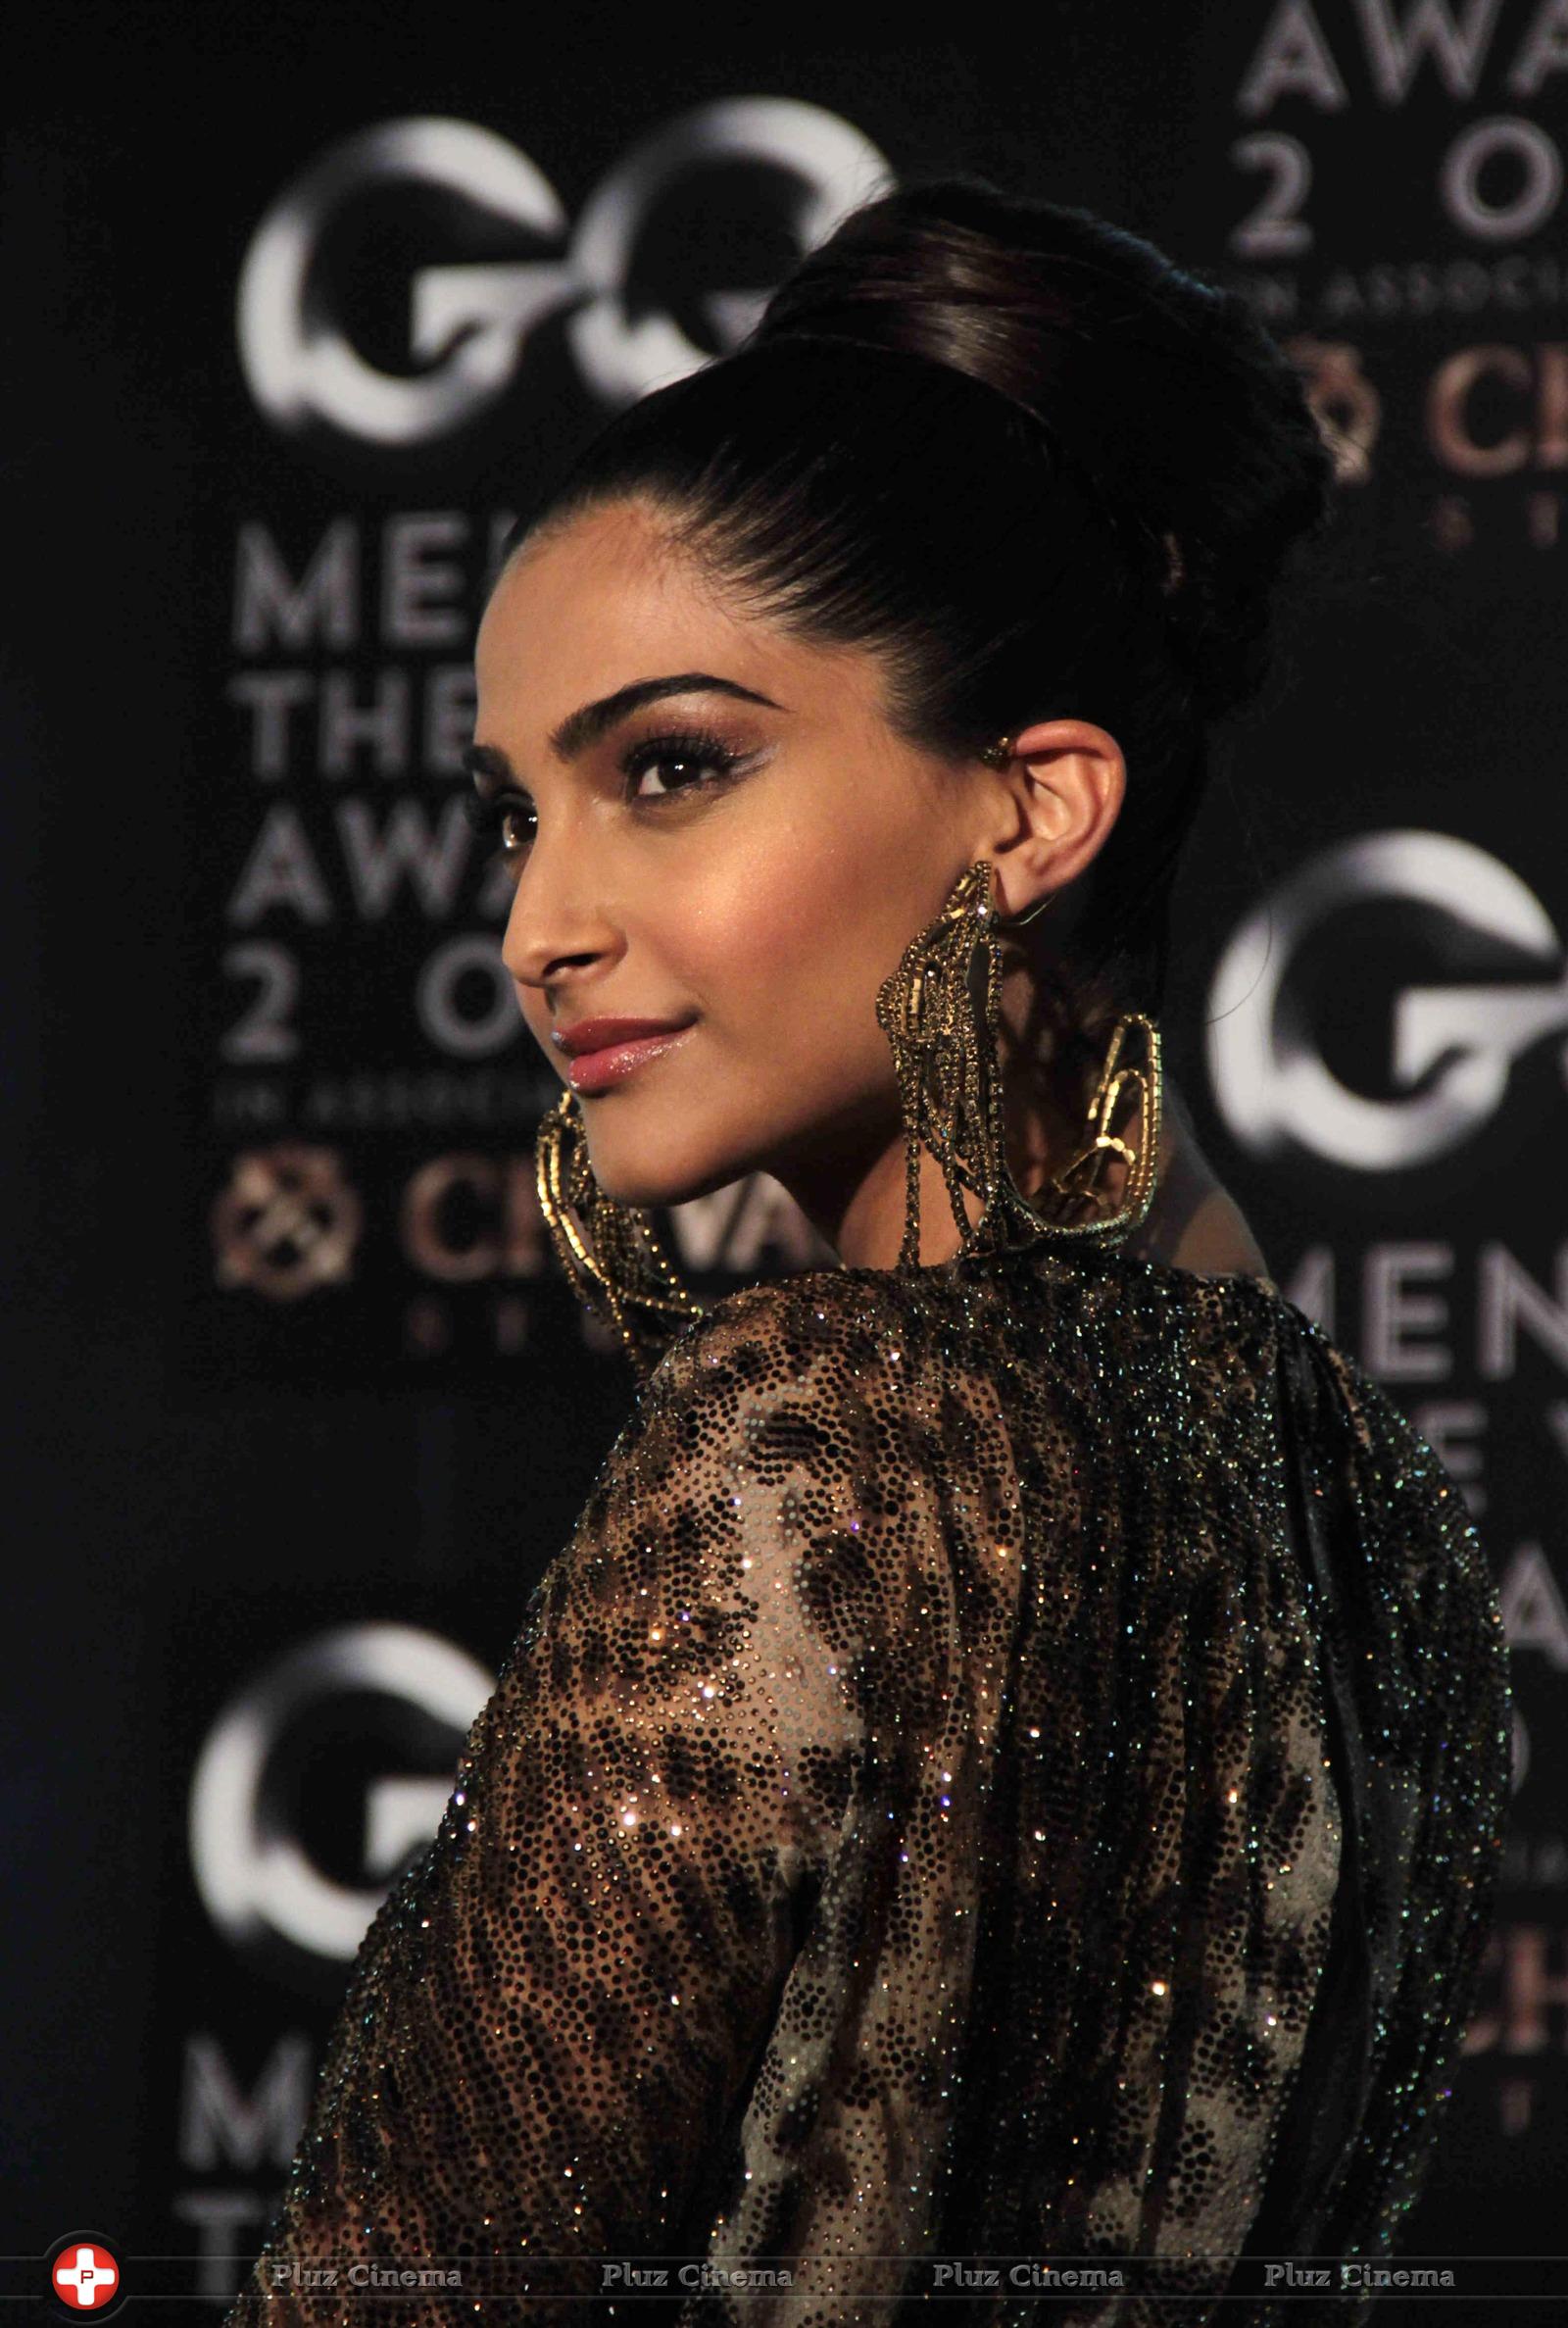 Sonam Kapoor Ahuja - GQ Man of the Year Award 2013 Photos | Picture 591320